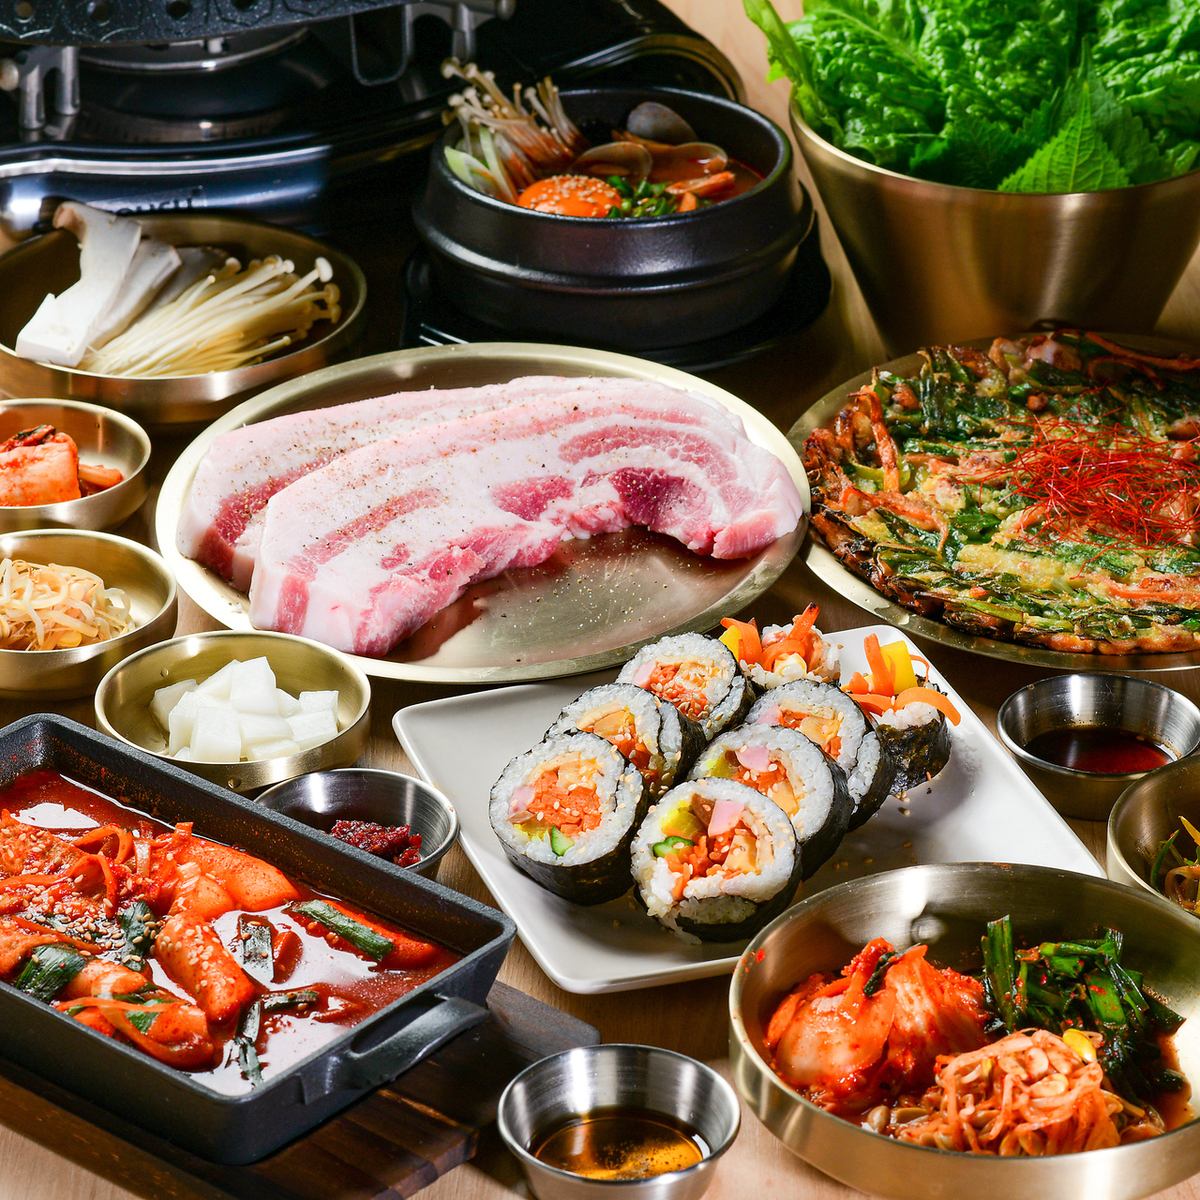 Try the samgyeopsal, possum, and more made with our carefully selected meat!